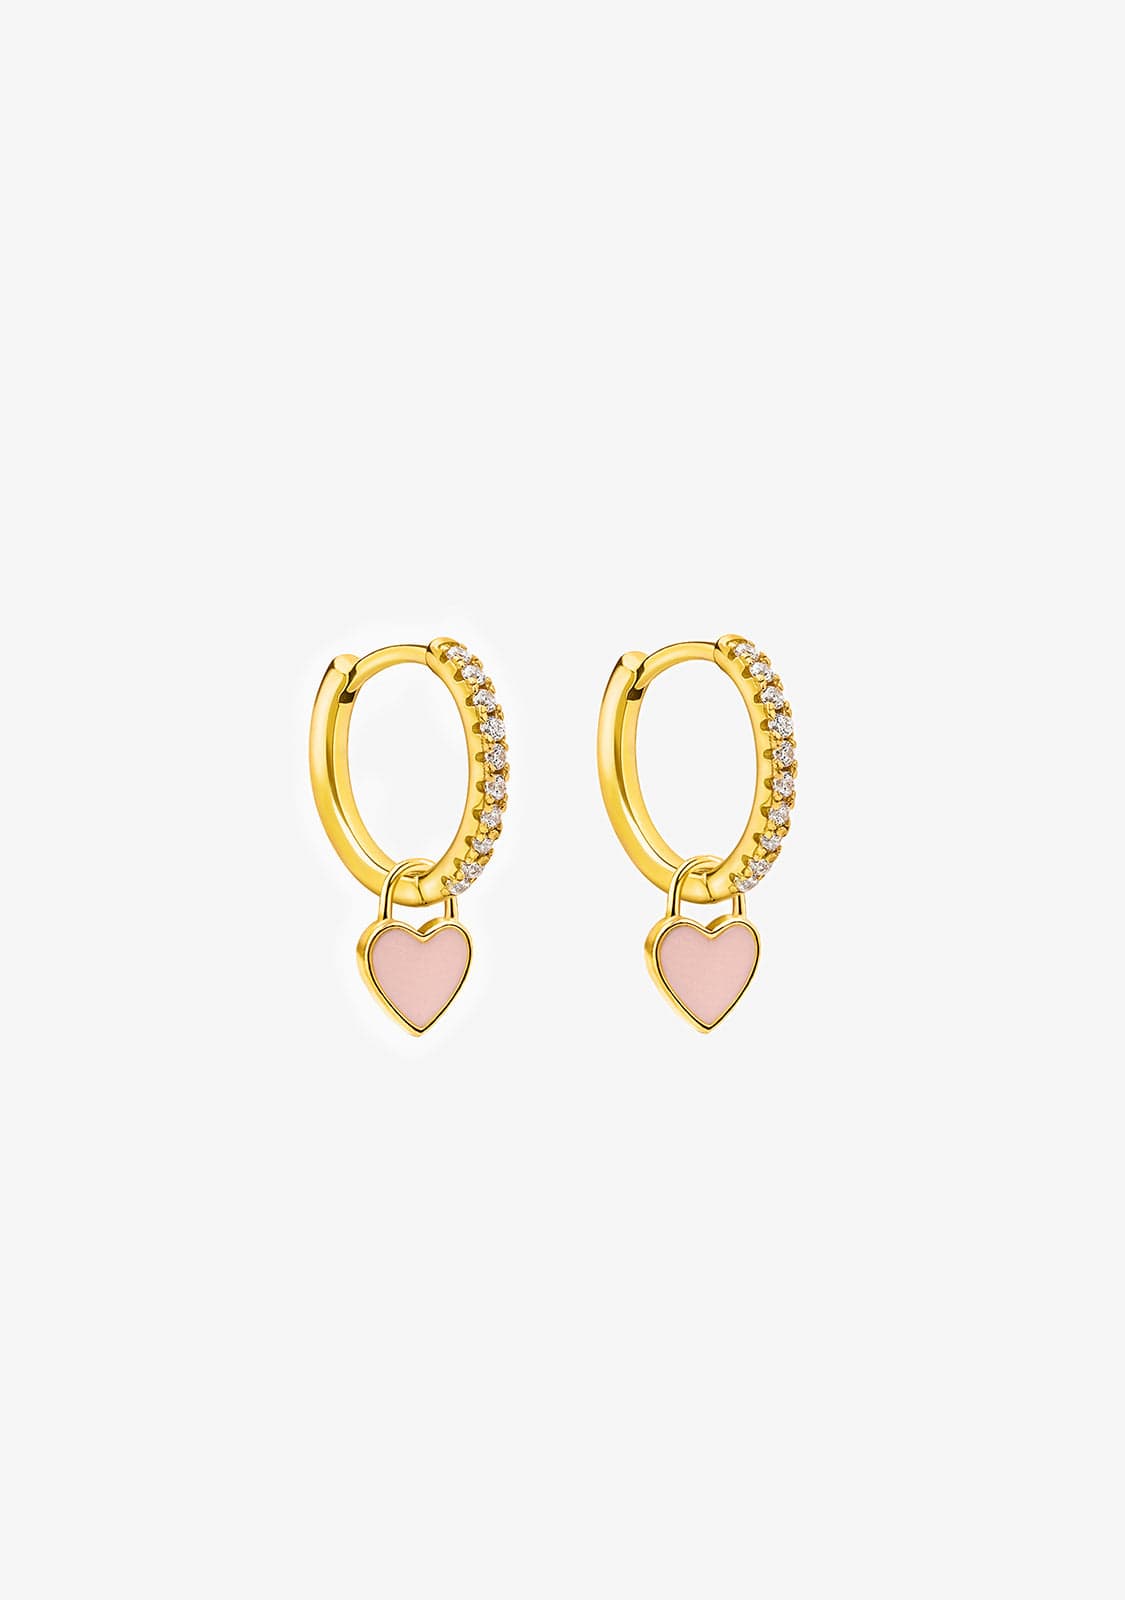 Addict To Candy Hoop Earrings Gold